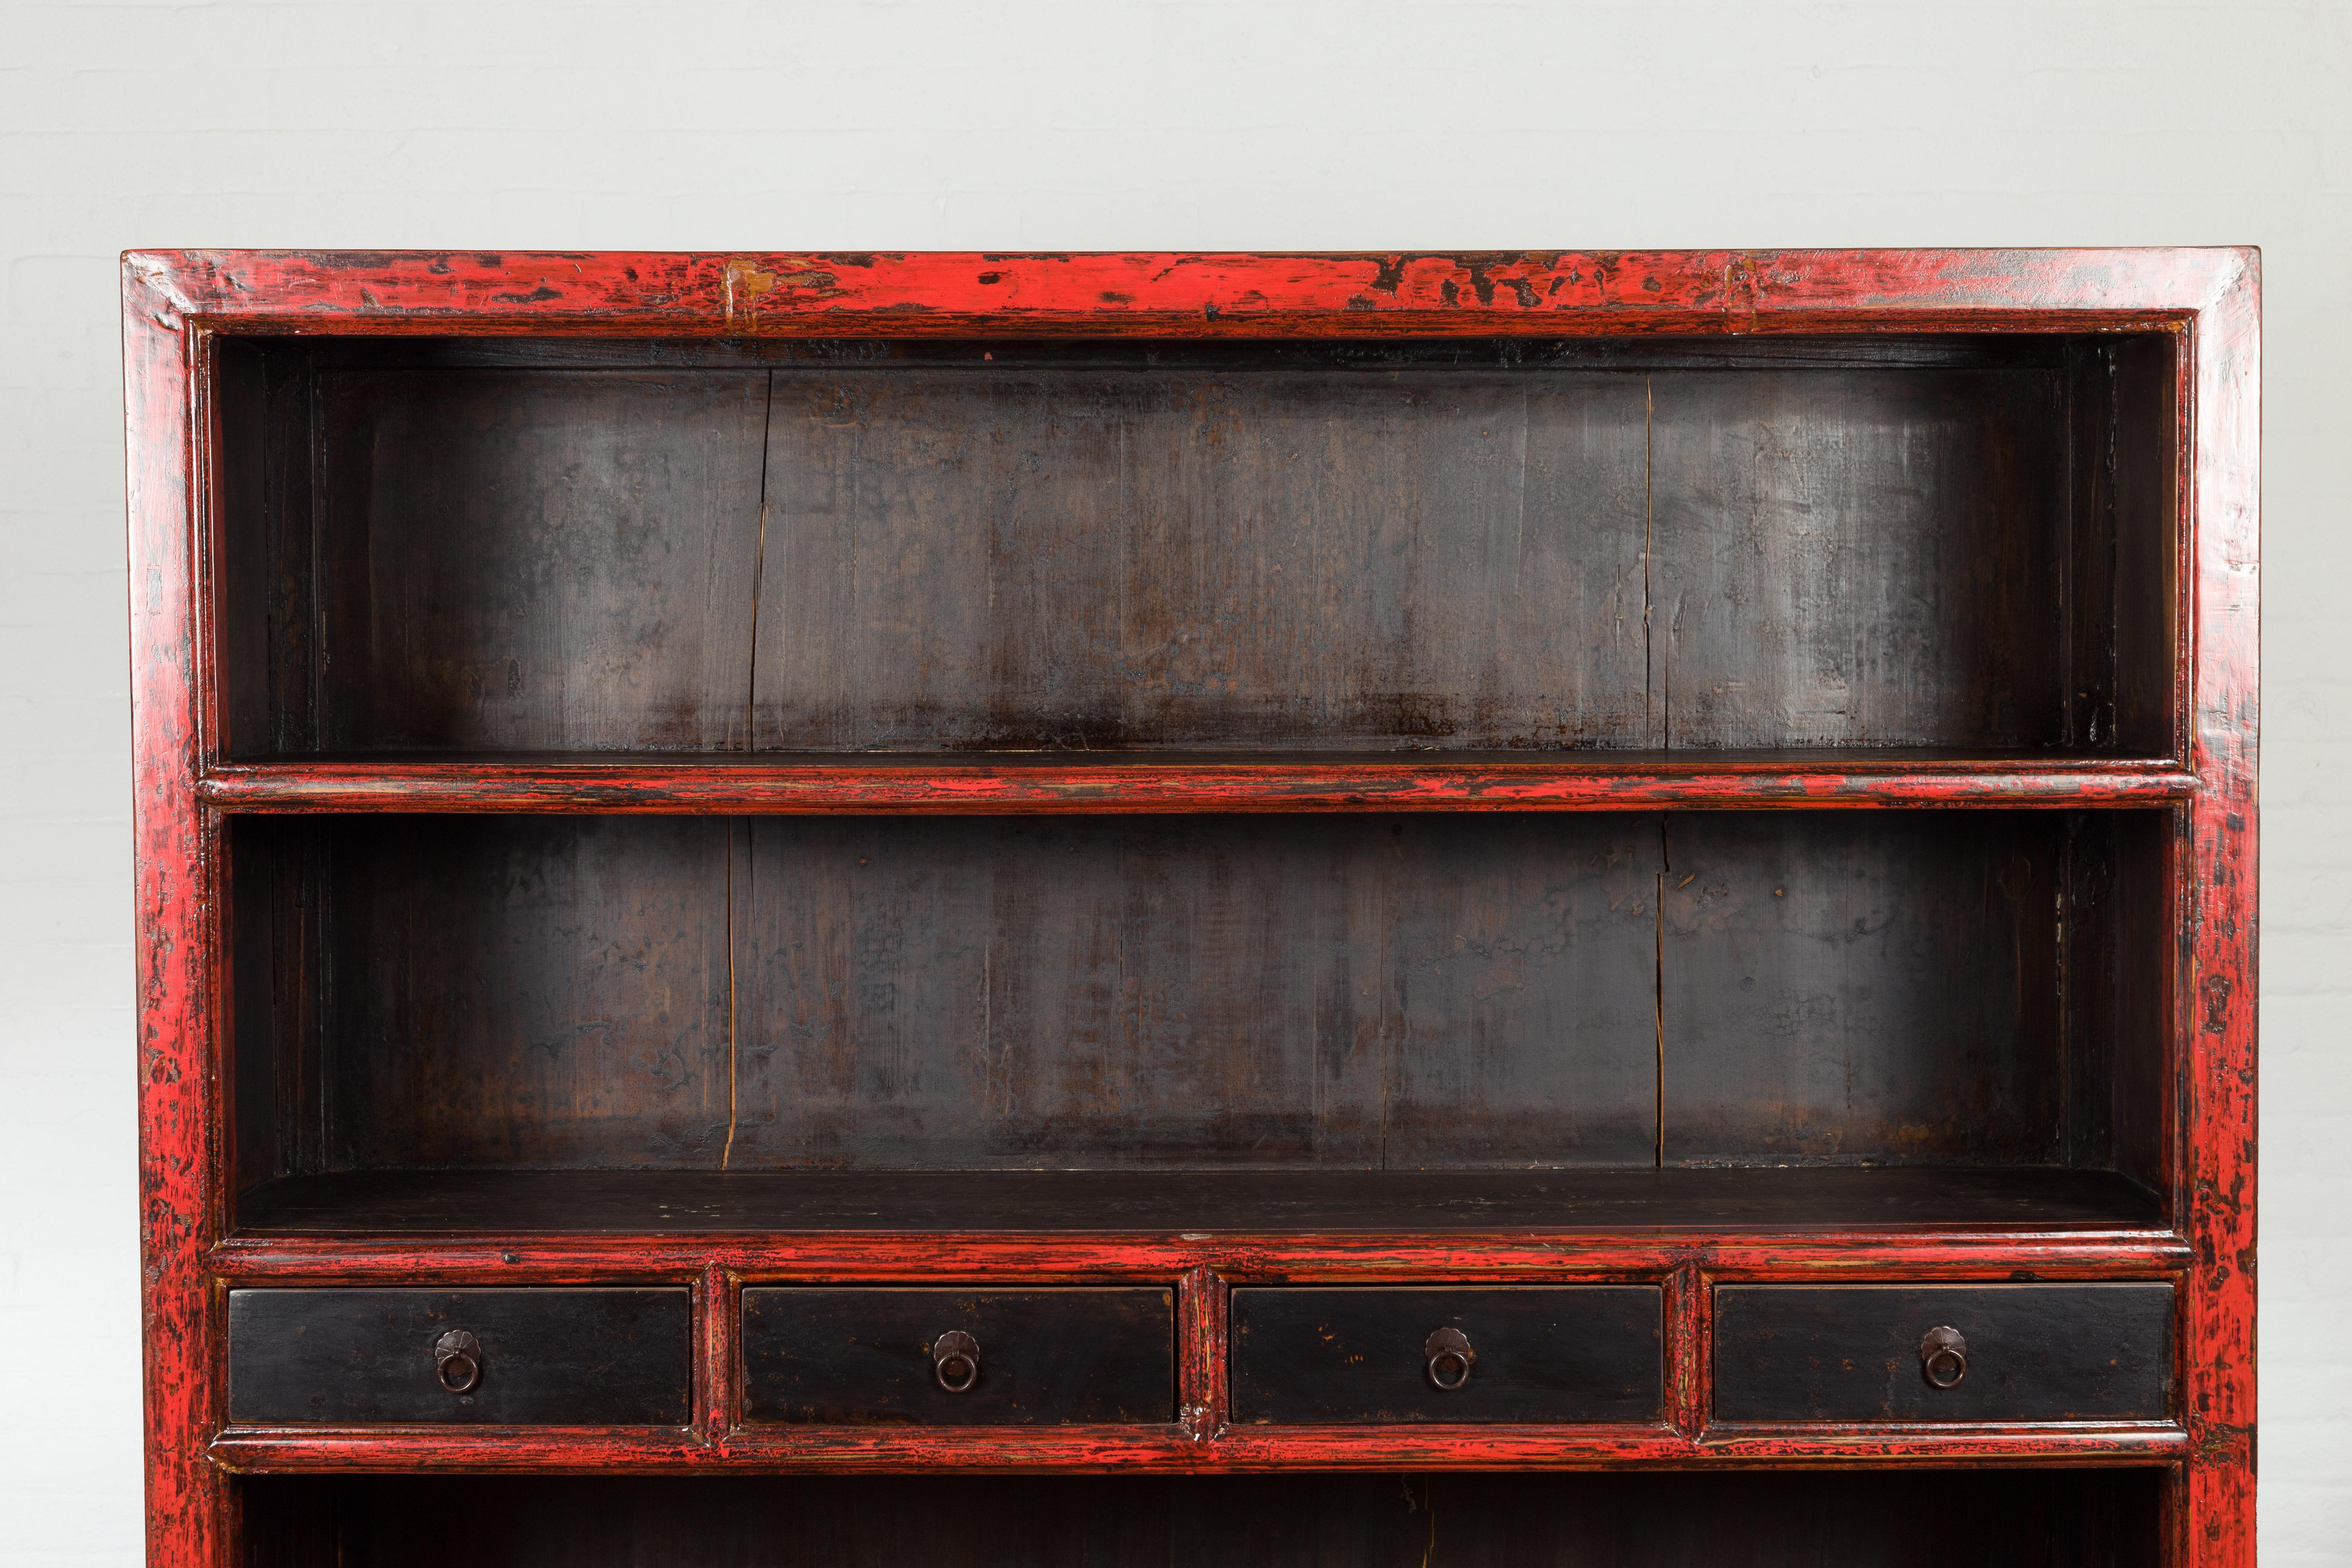 Chinese Qing Dynasty Period 19th Century Bookcase with Red and Brown Lacquer In Good Condition For Sale In Yonkers, NY